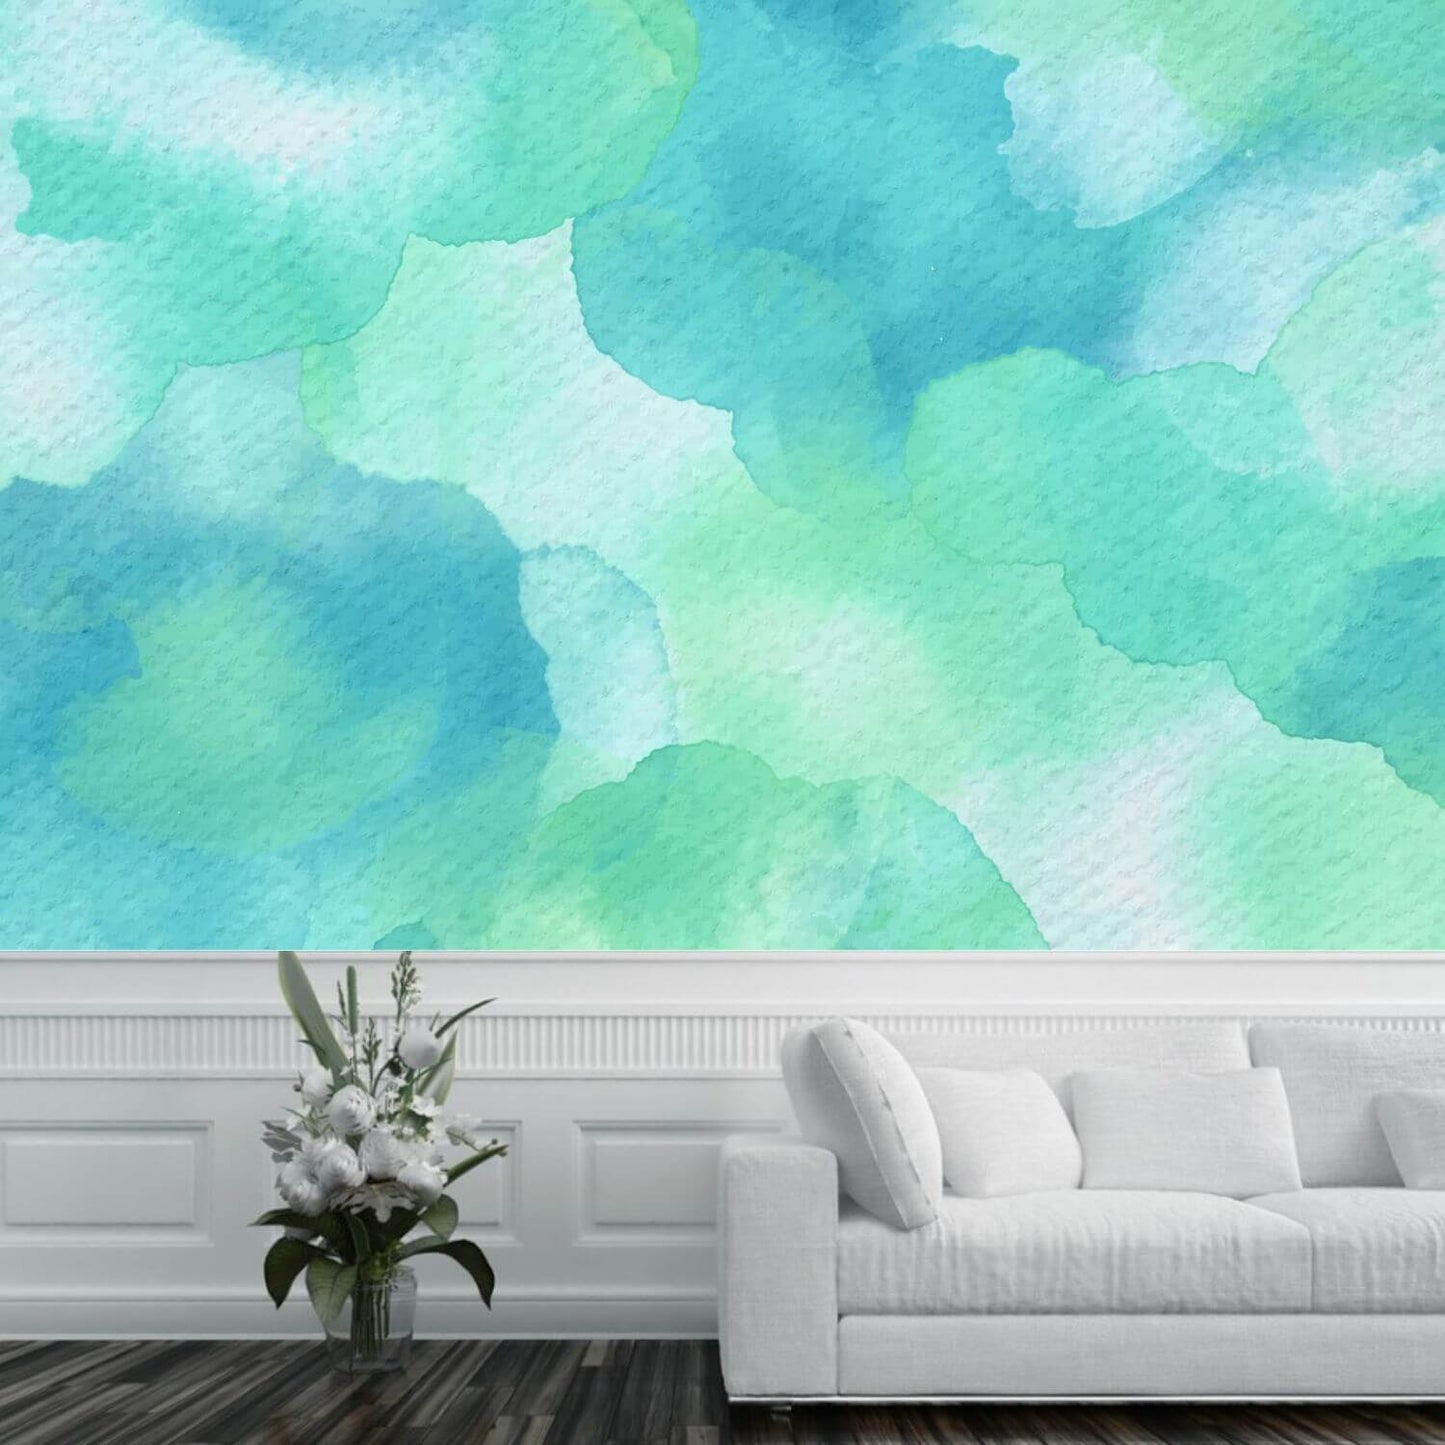 Abstract Watercolor in Turquoise Mural Wallpaper (SqM)